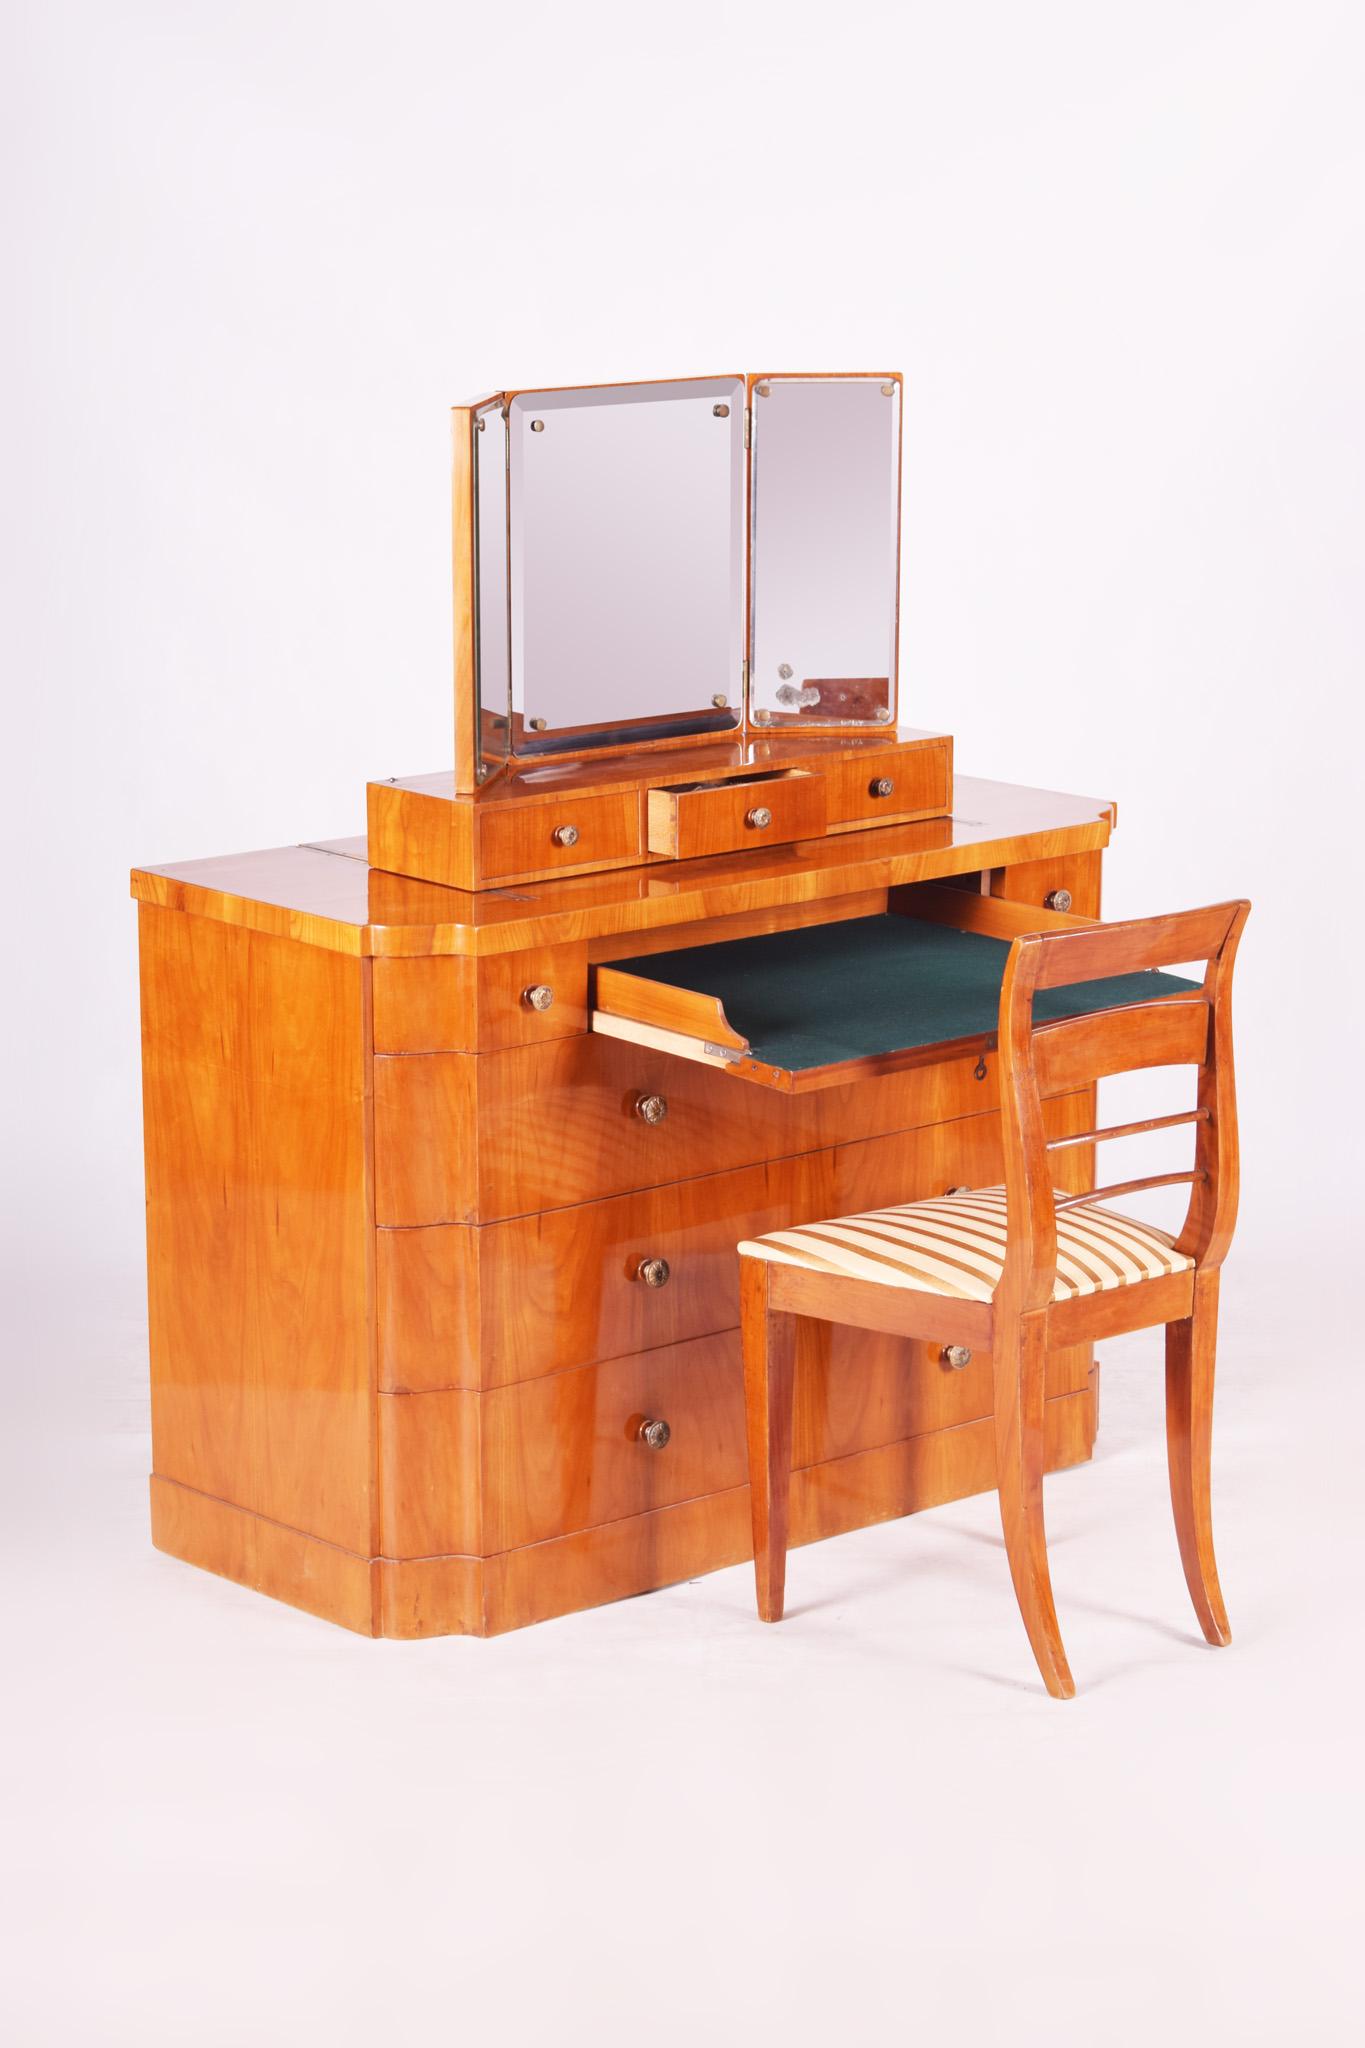 Unique Czech Art Deco Dressing Table with Mirror, Cherry-Tree, Restored, 1920s For Sale 2